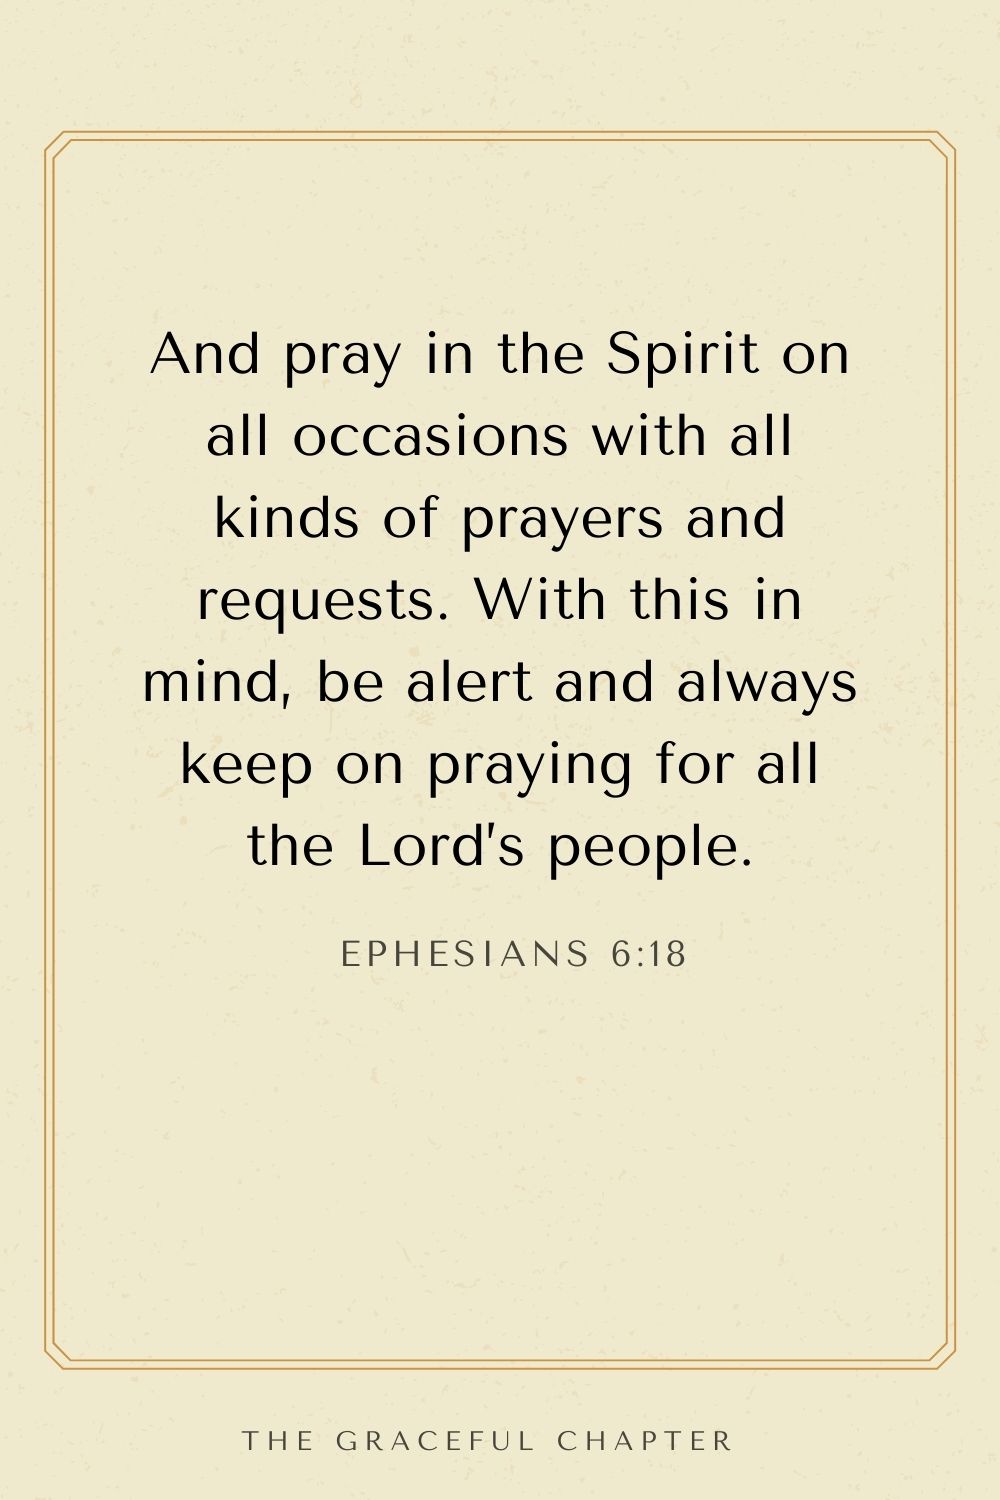 And pray in the Spirit on all occasions with all kinds of prayers and requests. With this in mind, be alert and always keep on praying for all the Lord’s people. Ephesians 6:18